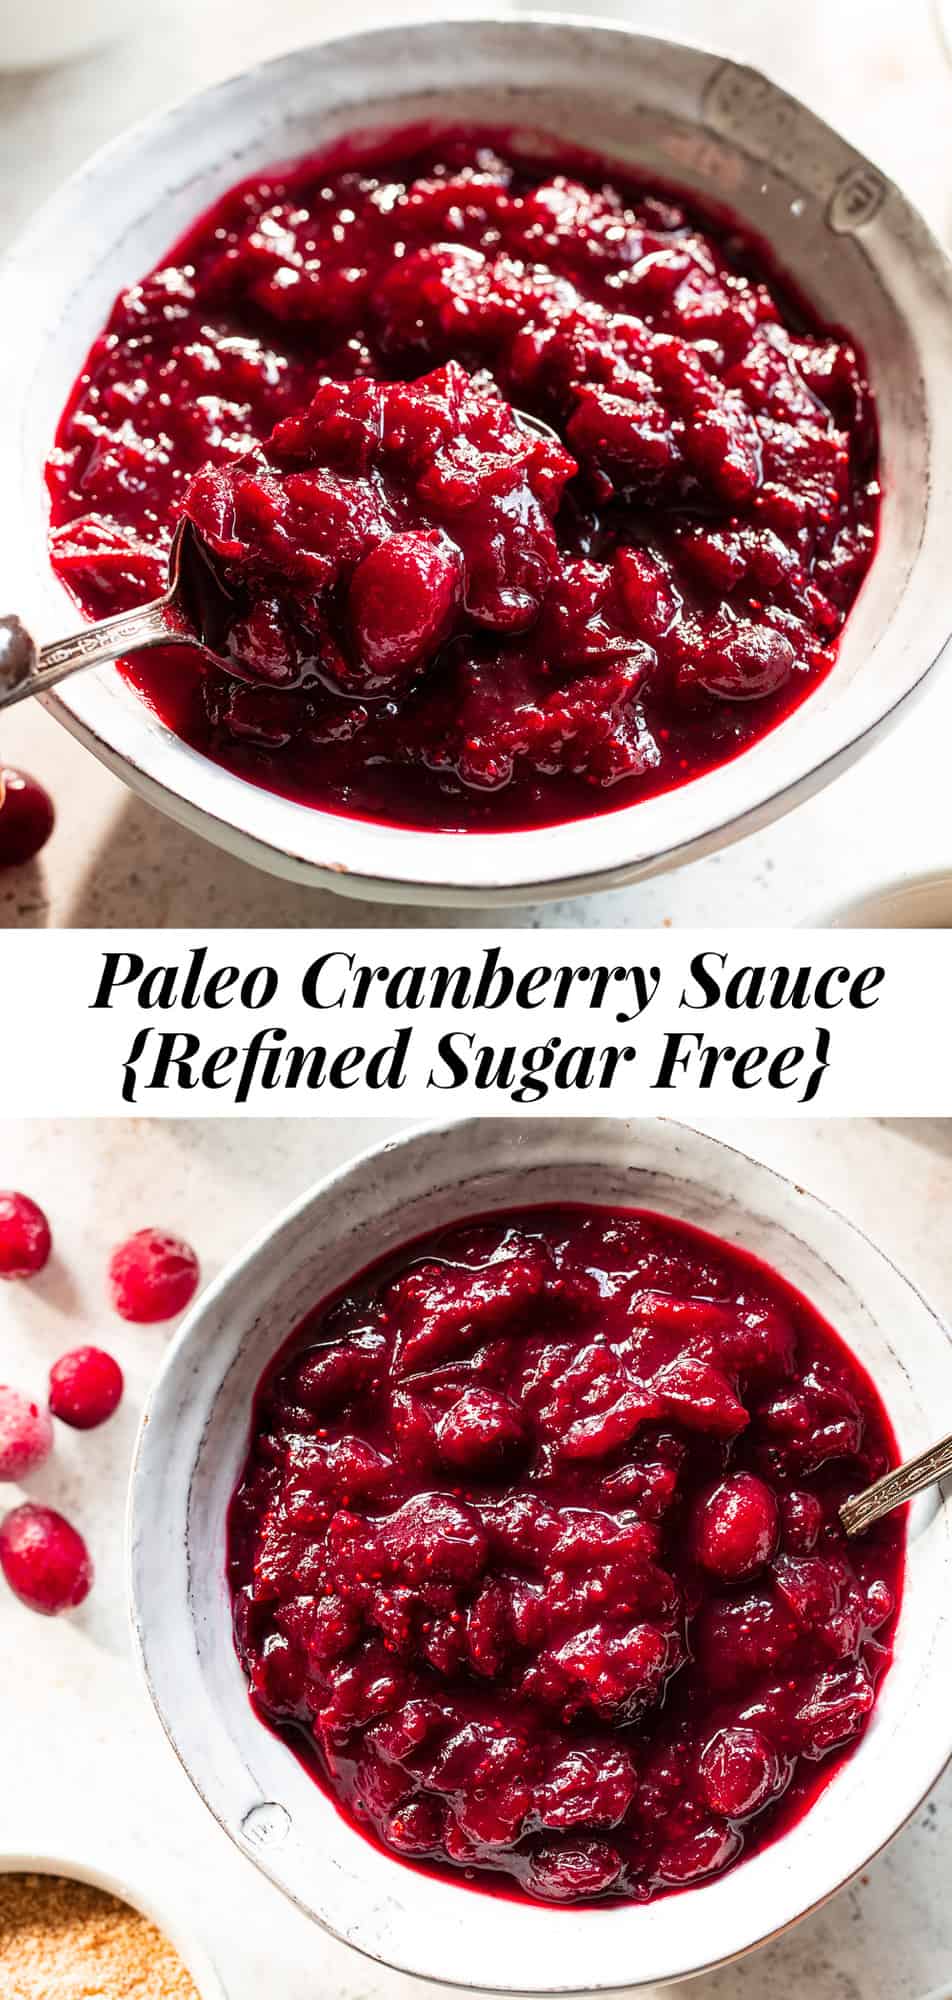 This is my go-to recipe for the simplest homemade Paleo Cranberry Sauce that's a family favorite! An easy tweak makes this holiday (or anytime!) favorite refined sugar free, vegan, Paleo, and healthy. #paleo #cleaneating #Thanksgiving #cranberrysauce #vegan